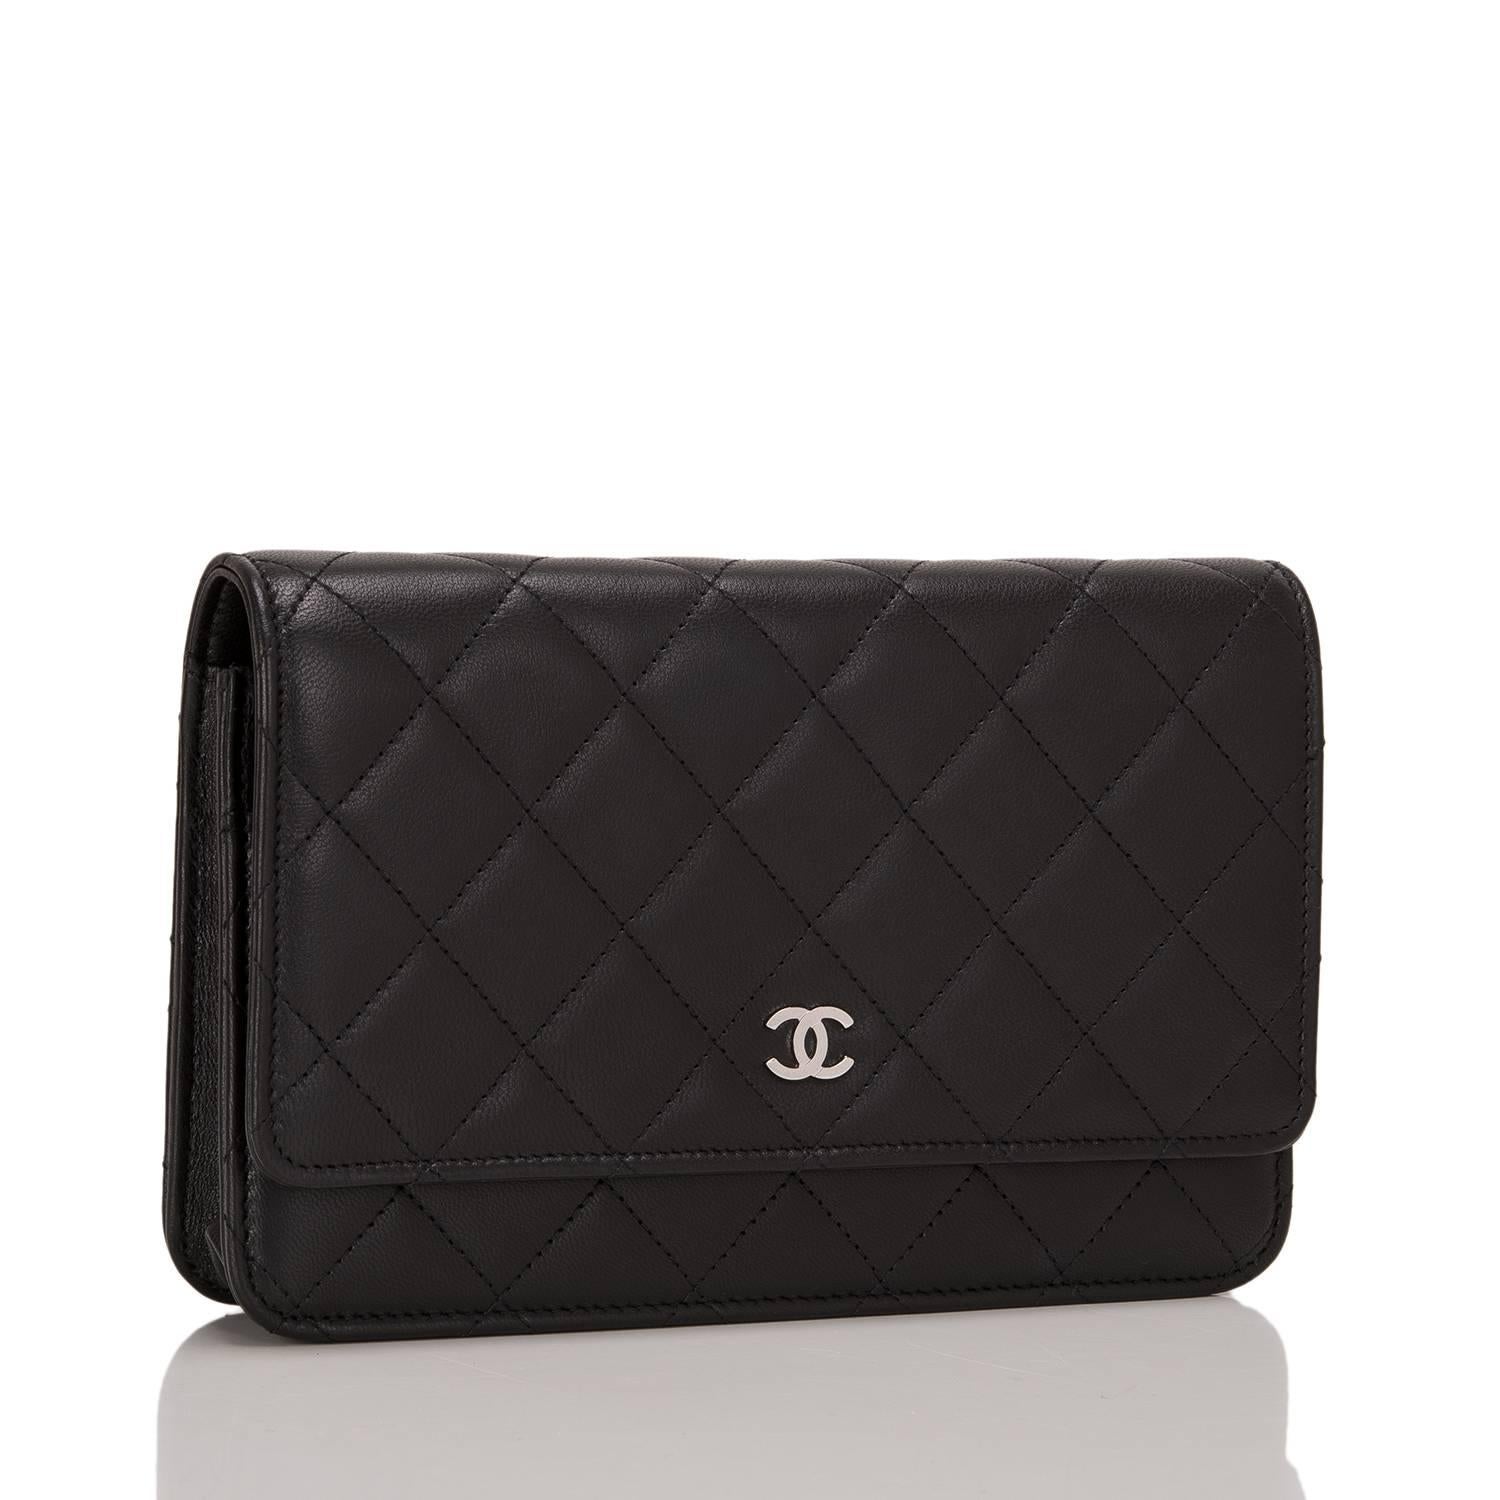 Chanel Classic Wallet On Chain (WOC) of black calfskin leather with silver tone hardware.

This Wallet On Chain features signature Chanel quilting, a front flap with CC charm and hidden snap closure, a half moon pocket at the rear and an